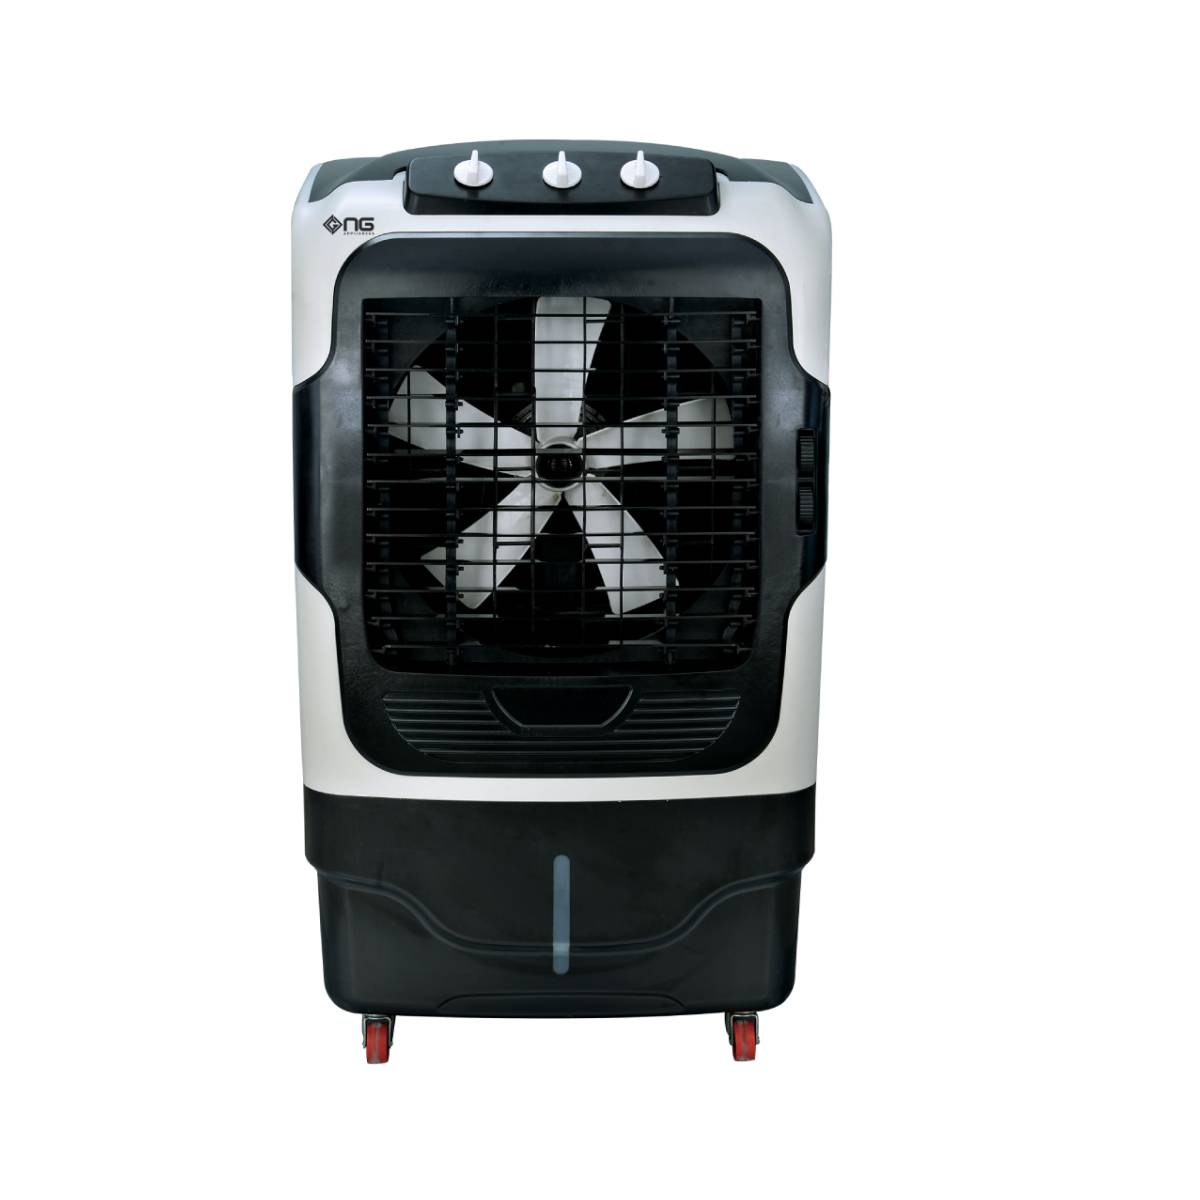 Nasgas Room Air Cooler NAC-9400 Dc 12 Volt Unique & Stylish Design Cooling With Ice Box